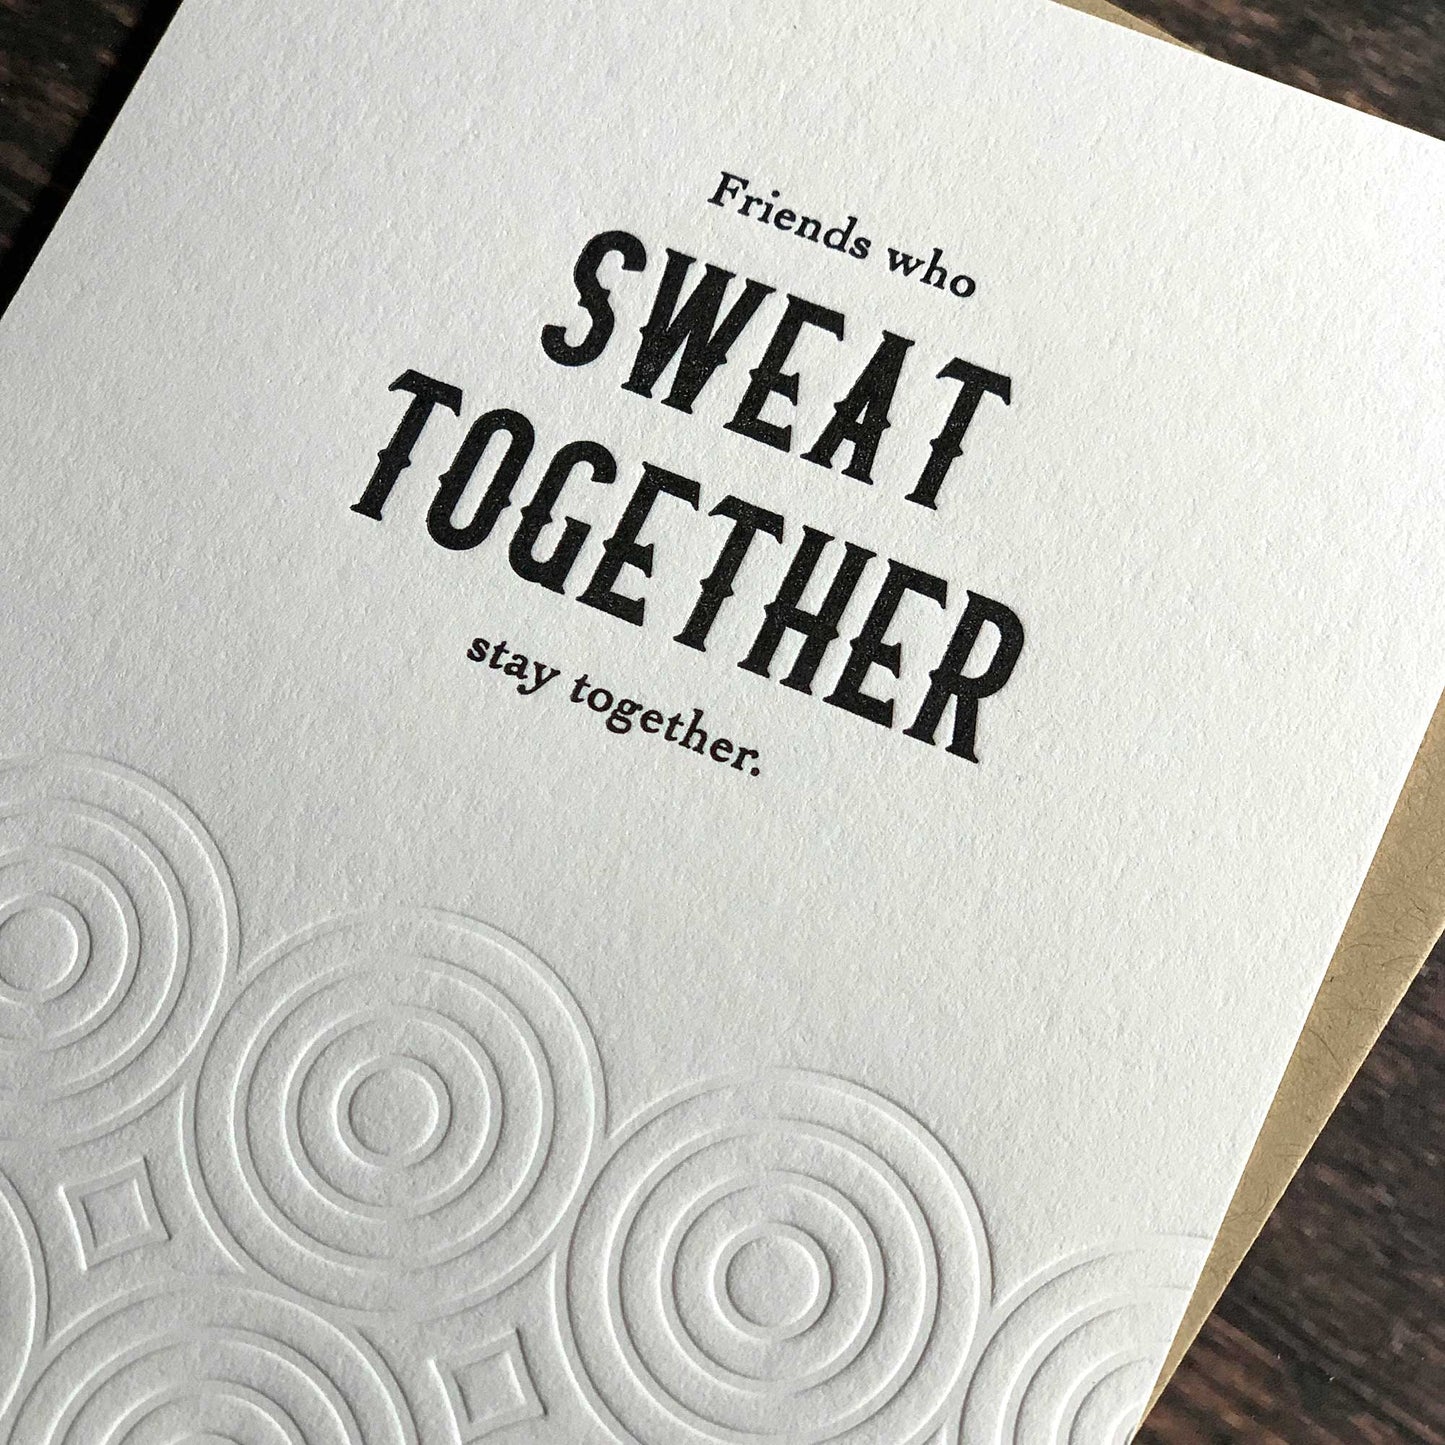 Friends who sweat together, stay together. Gym buddy Card for friend, Letterpress printed, view shows letterpress impression, includes envelope